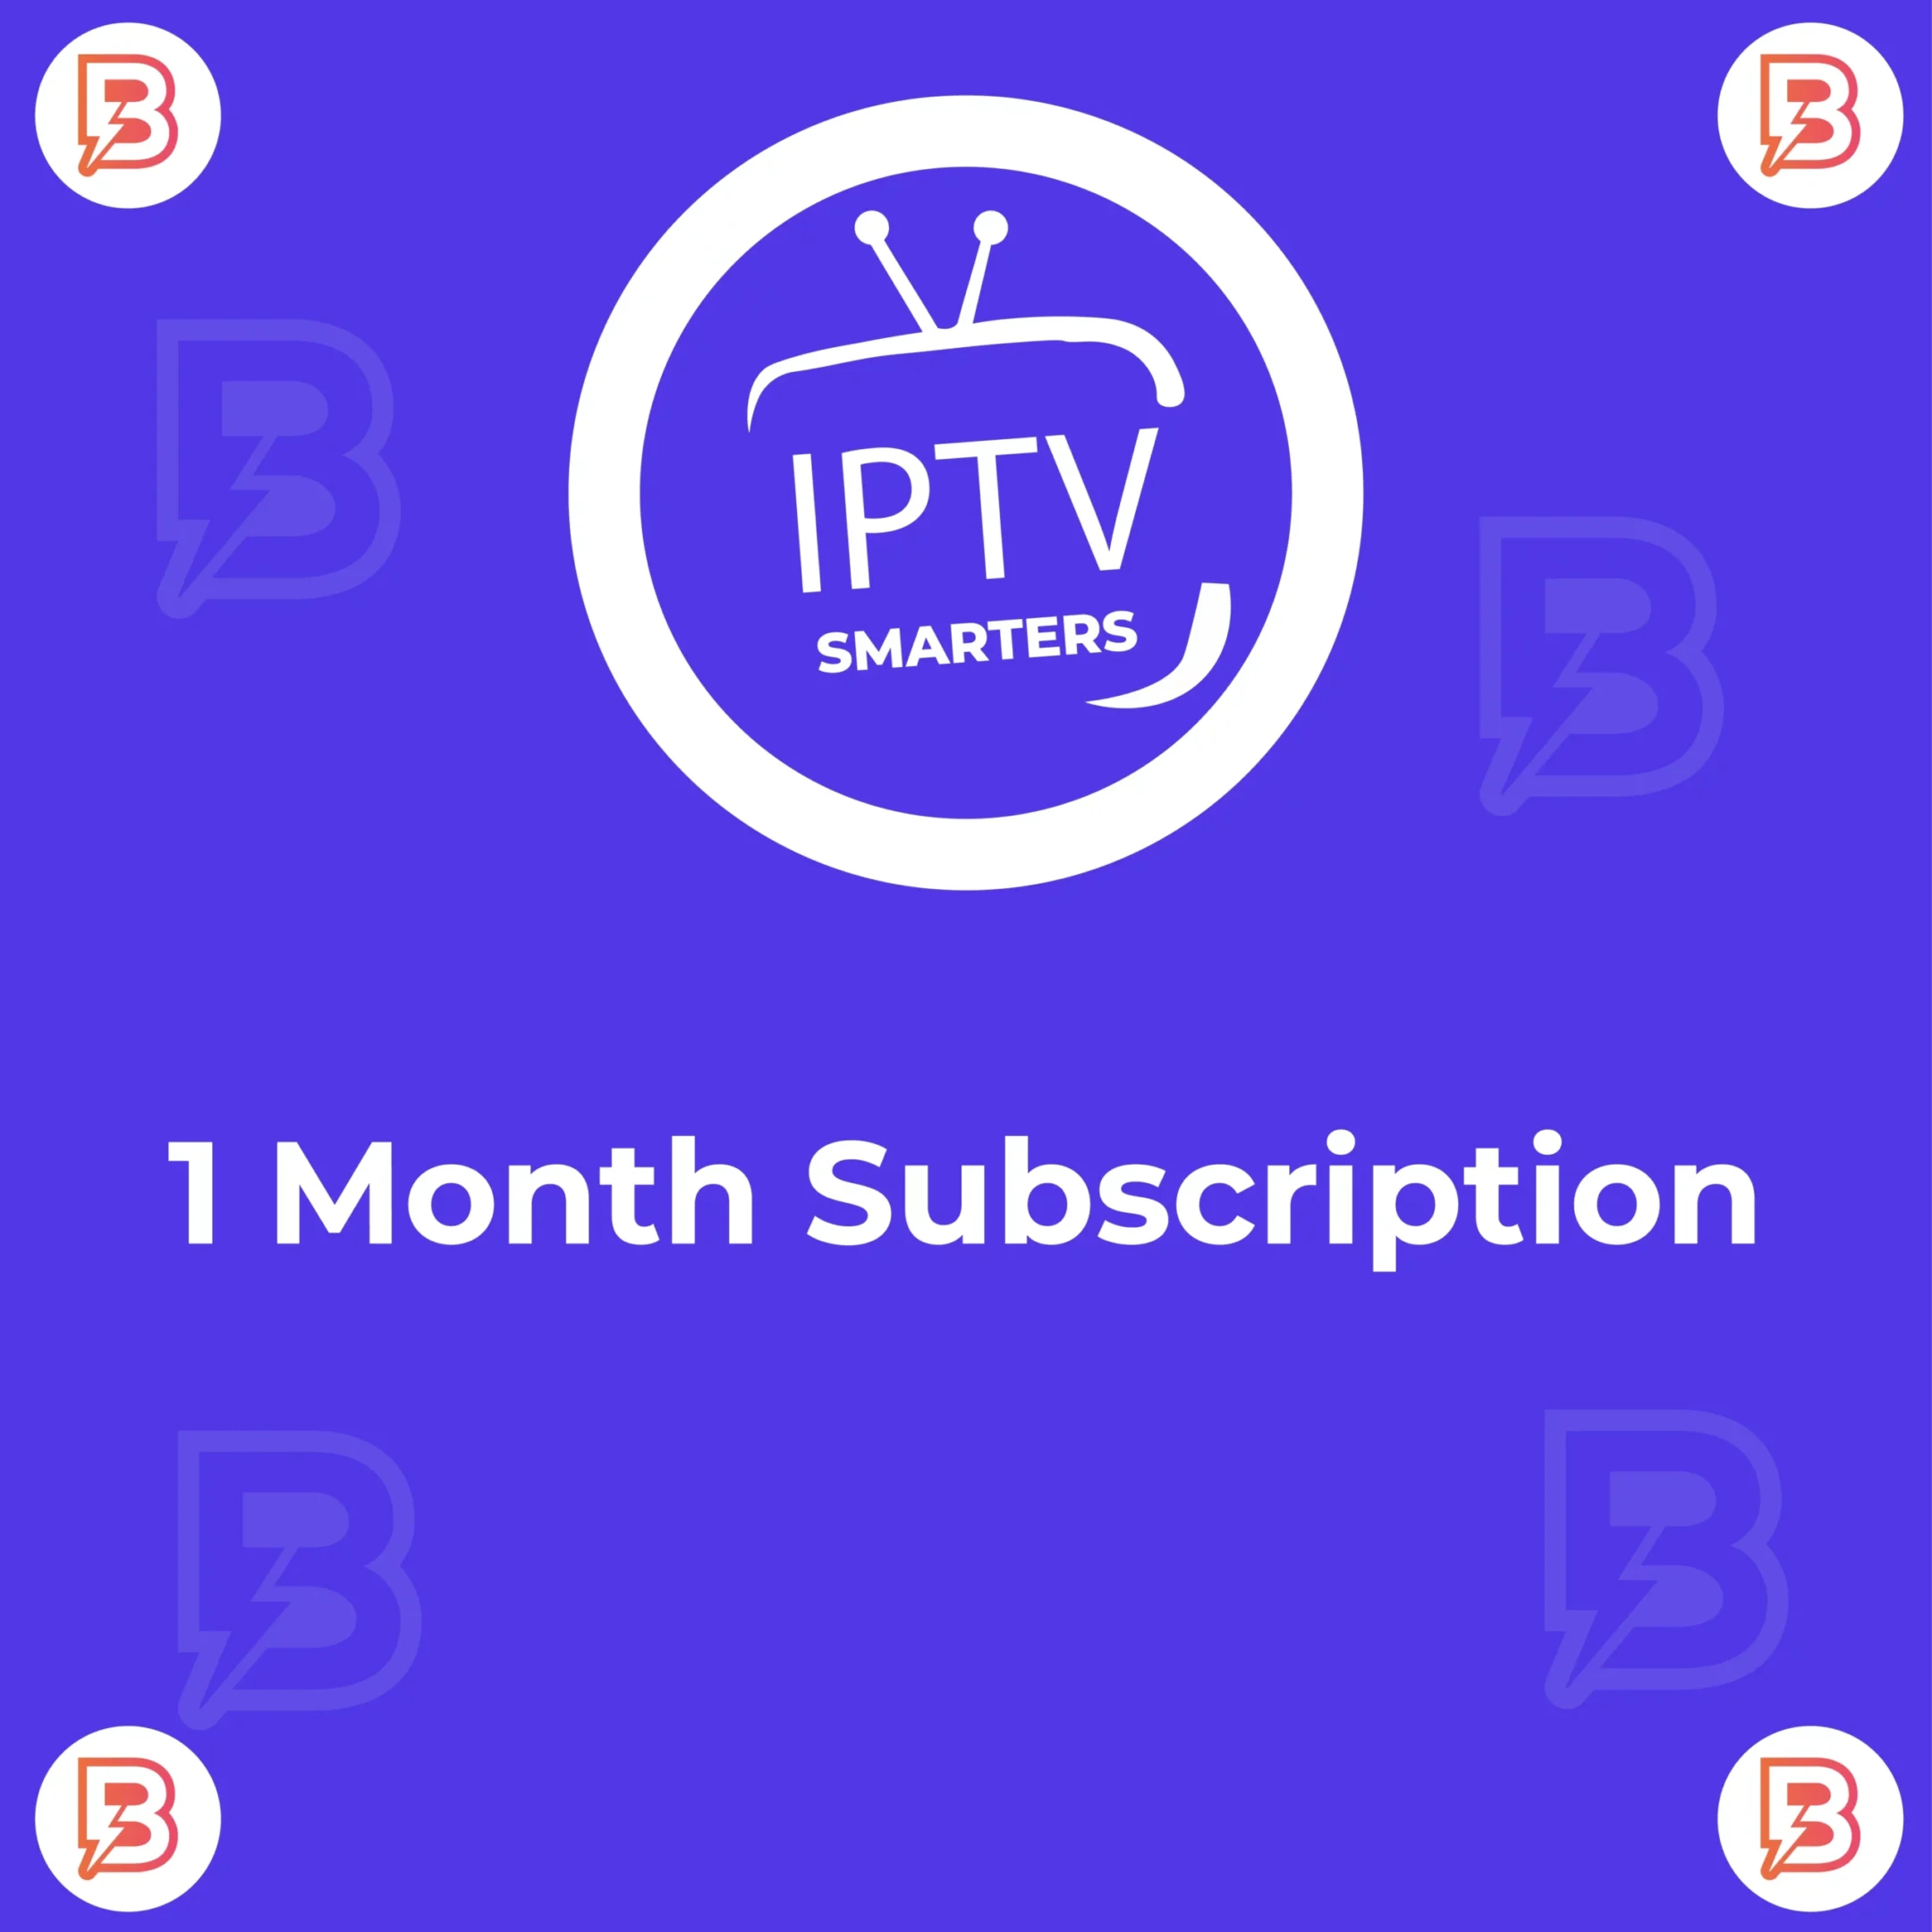 Buy 1 Month Subscription